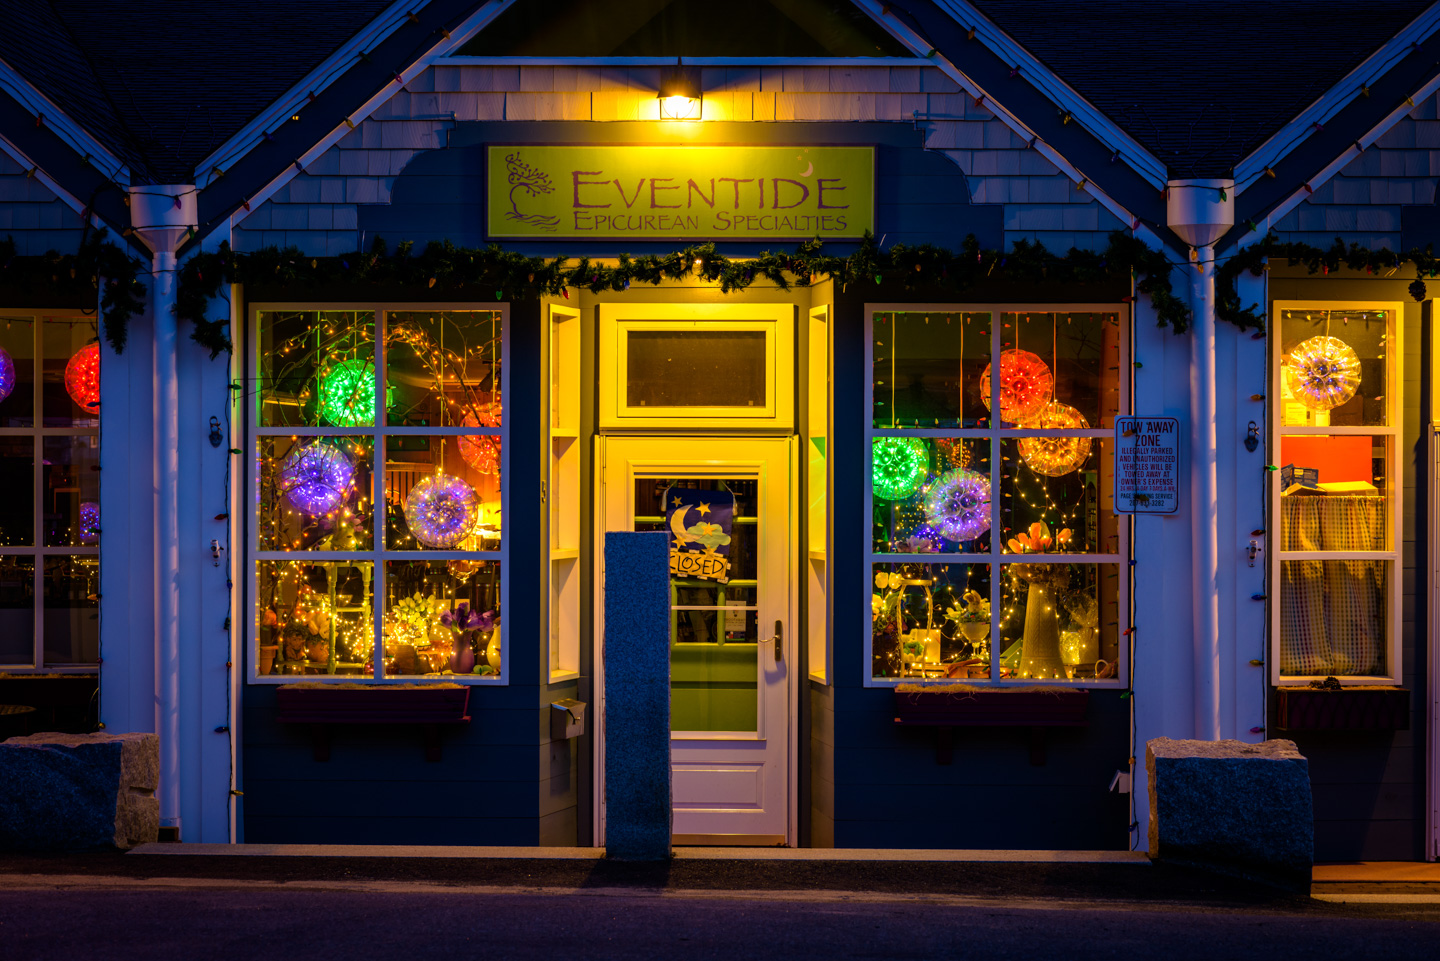 Eventide storefront in evening